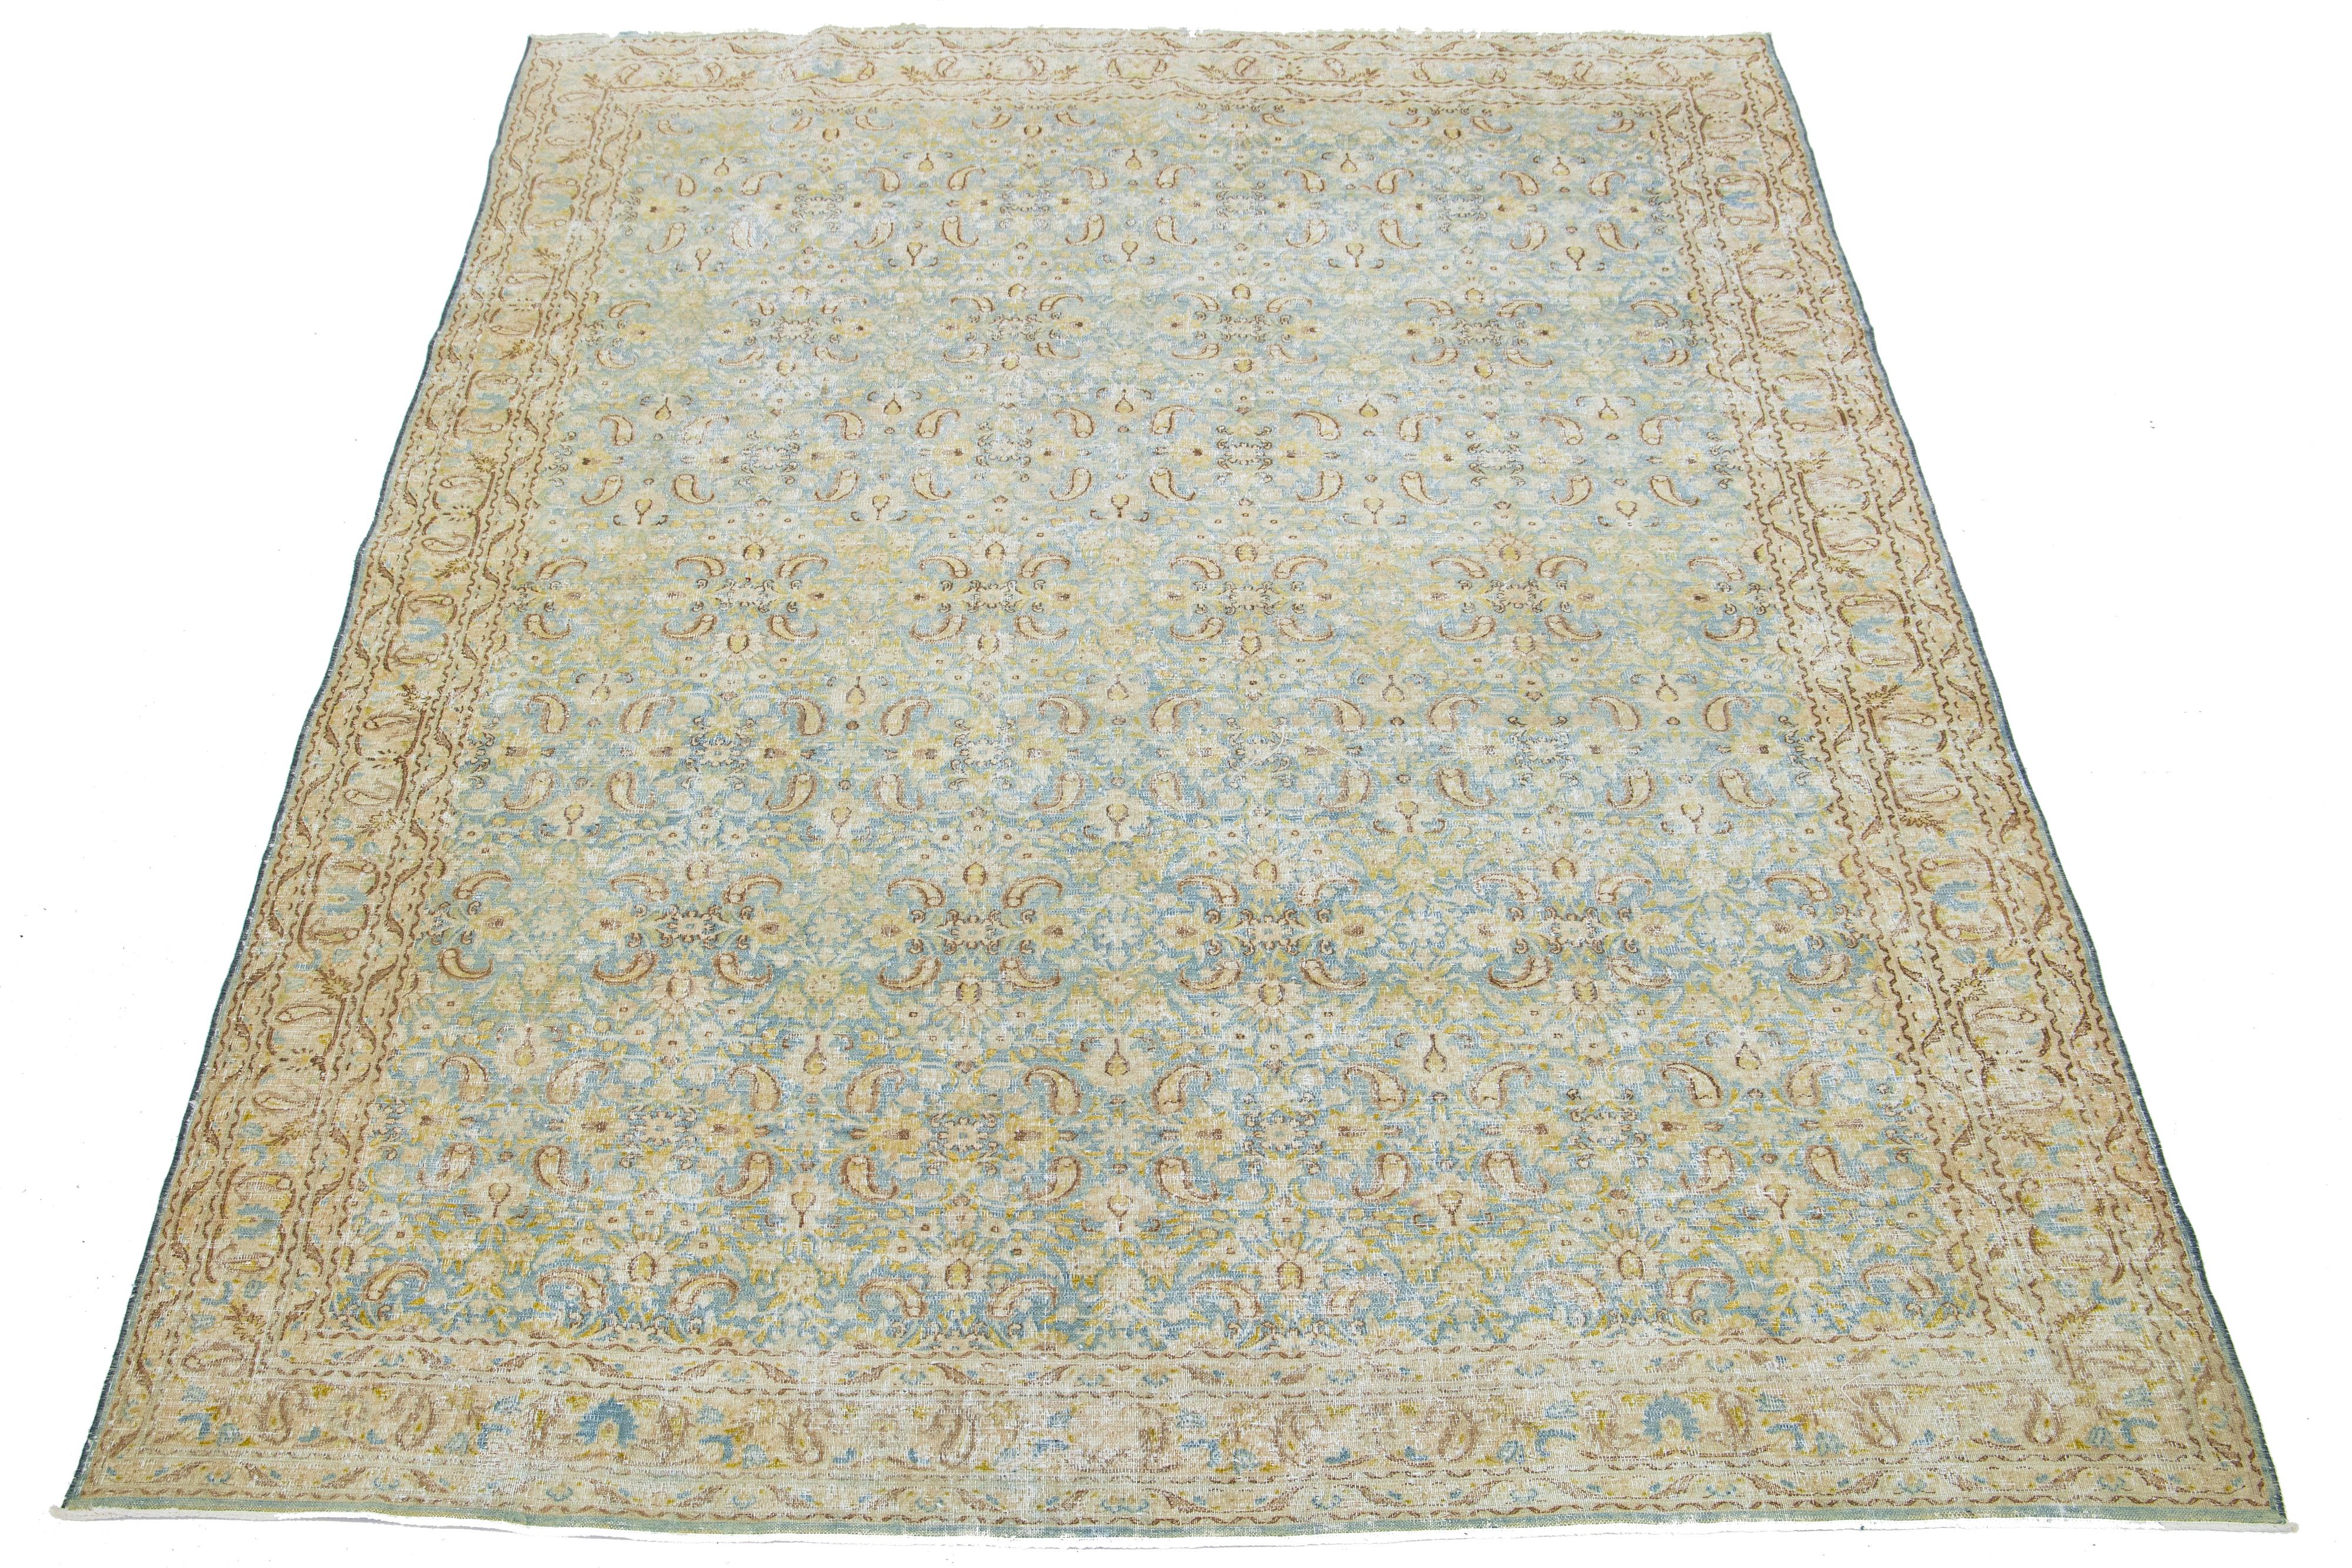 This Persian Tabriz wool rug from the 1920s showcases a handcrafted floral pattern. A contrasting light blue backdrop and beige, green, and brown colors accentuate the design.

This rug measures 6'8